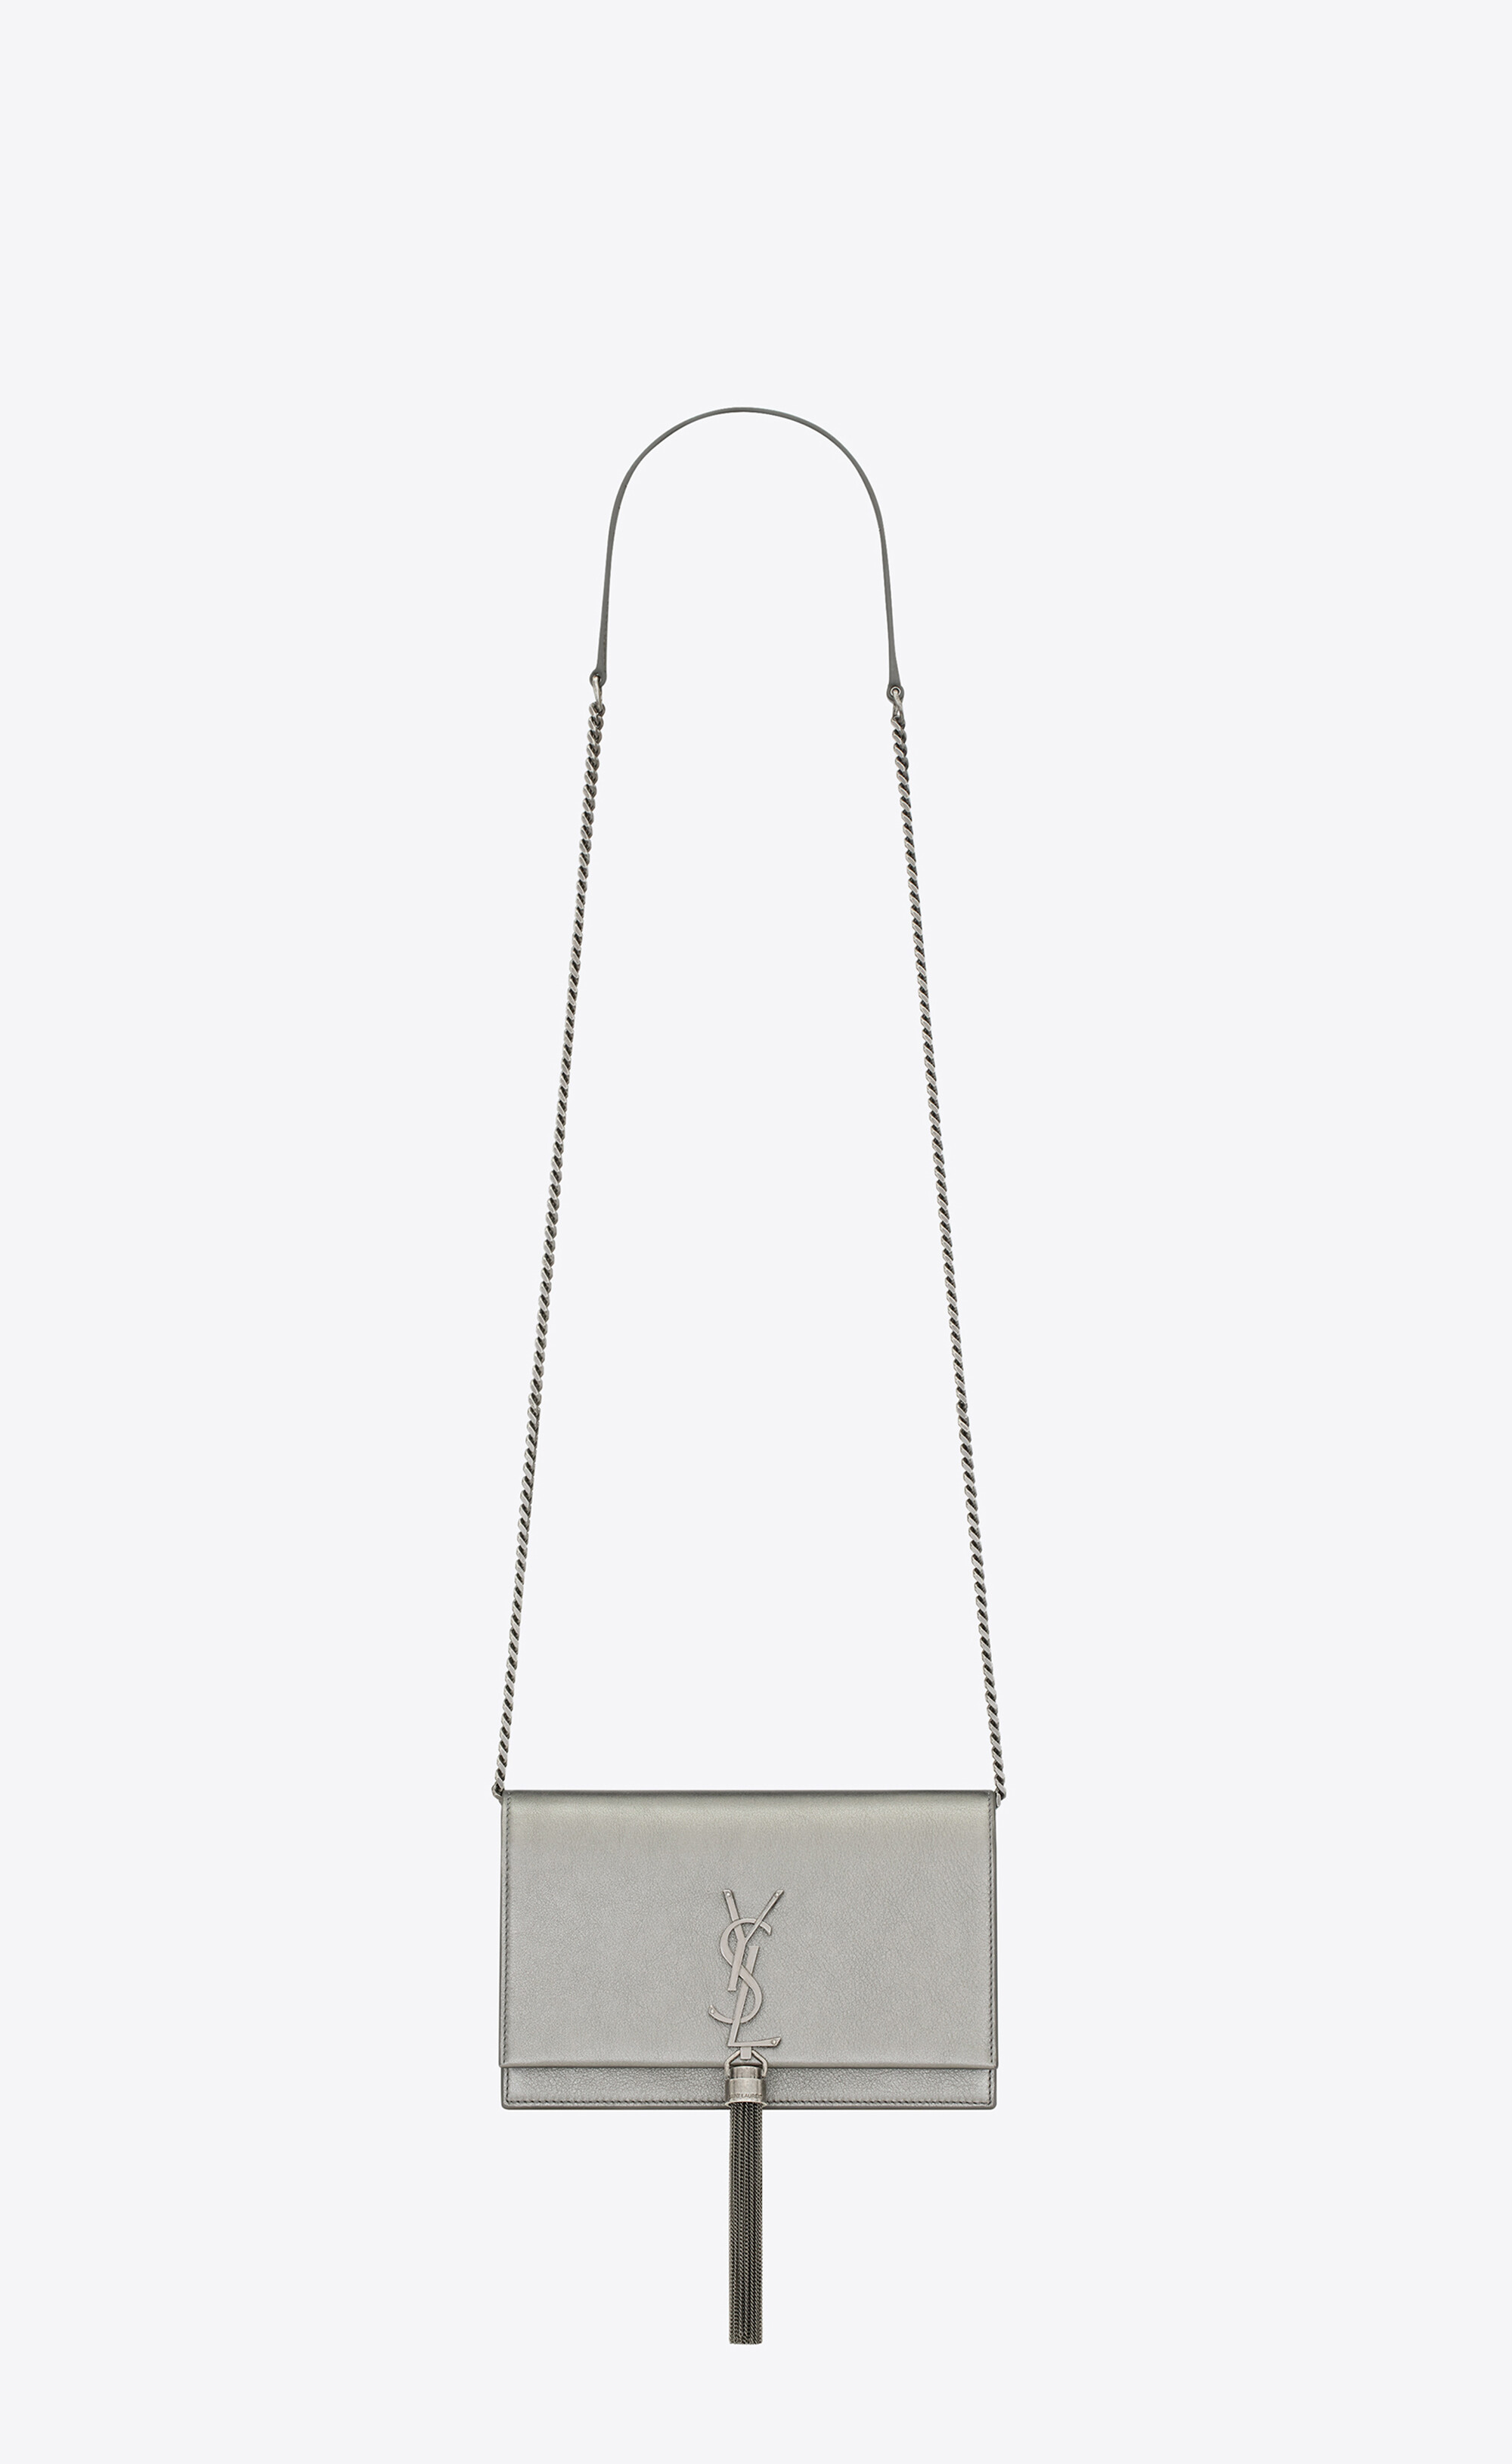 Saint Laurent Black Leather and Silver Star Kate Wallet on Chain